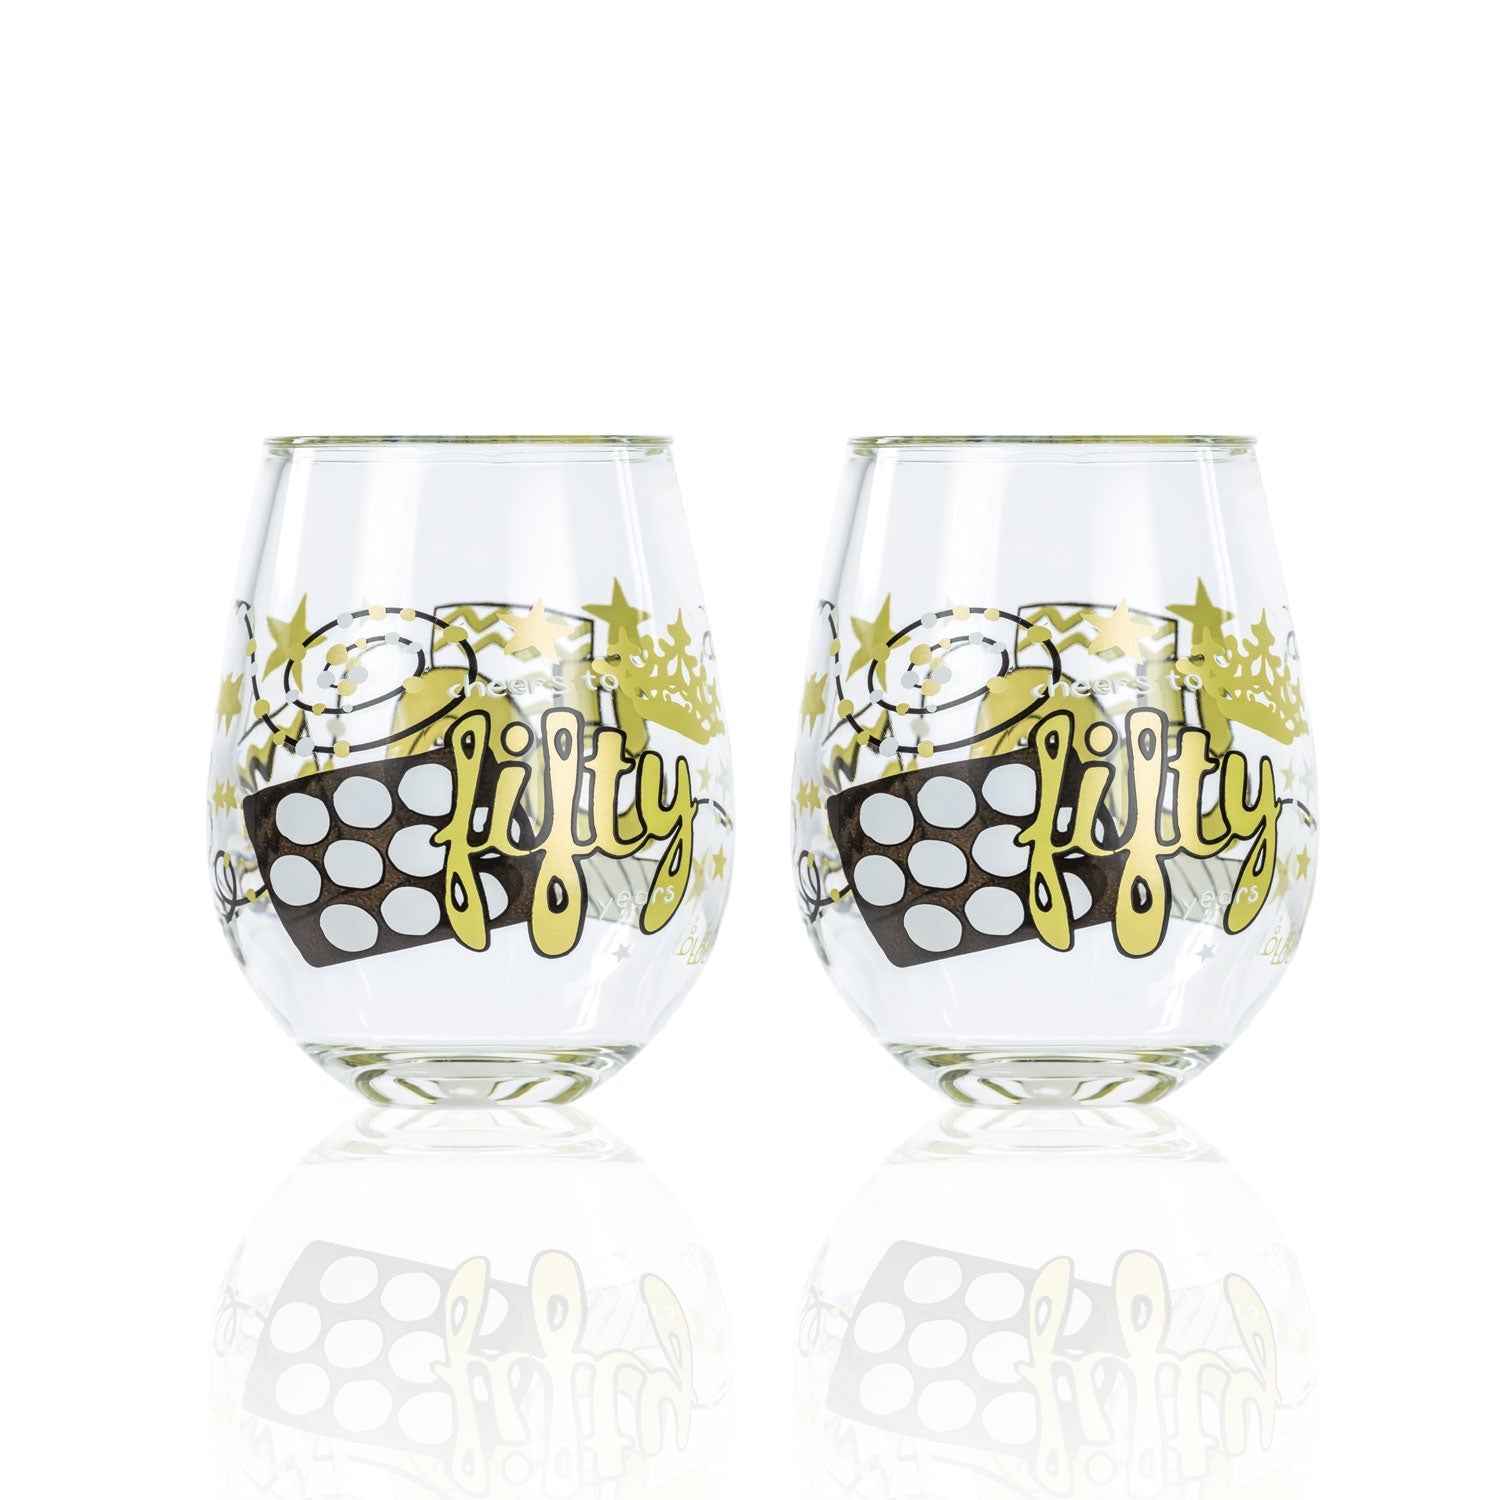 Party To Go by Lolita 50 years 15oz Acrylic Stemless Wine Glasses